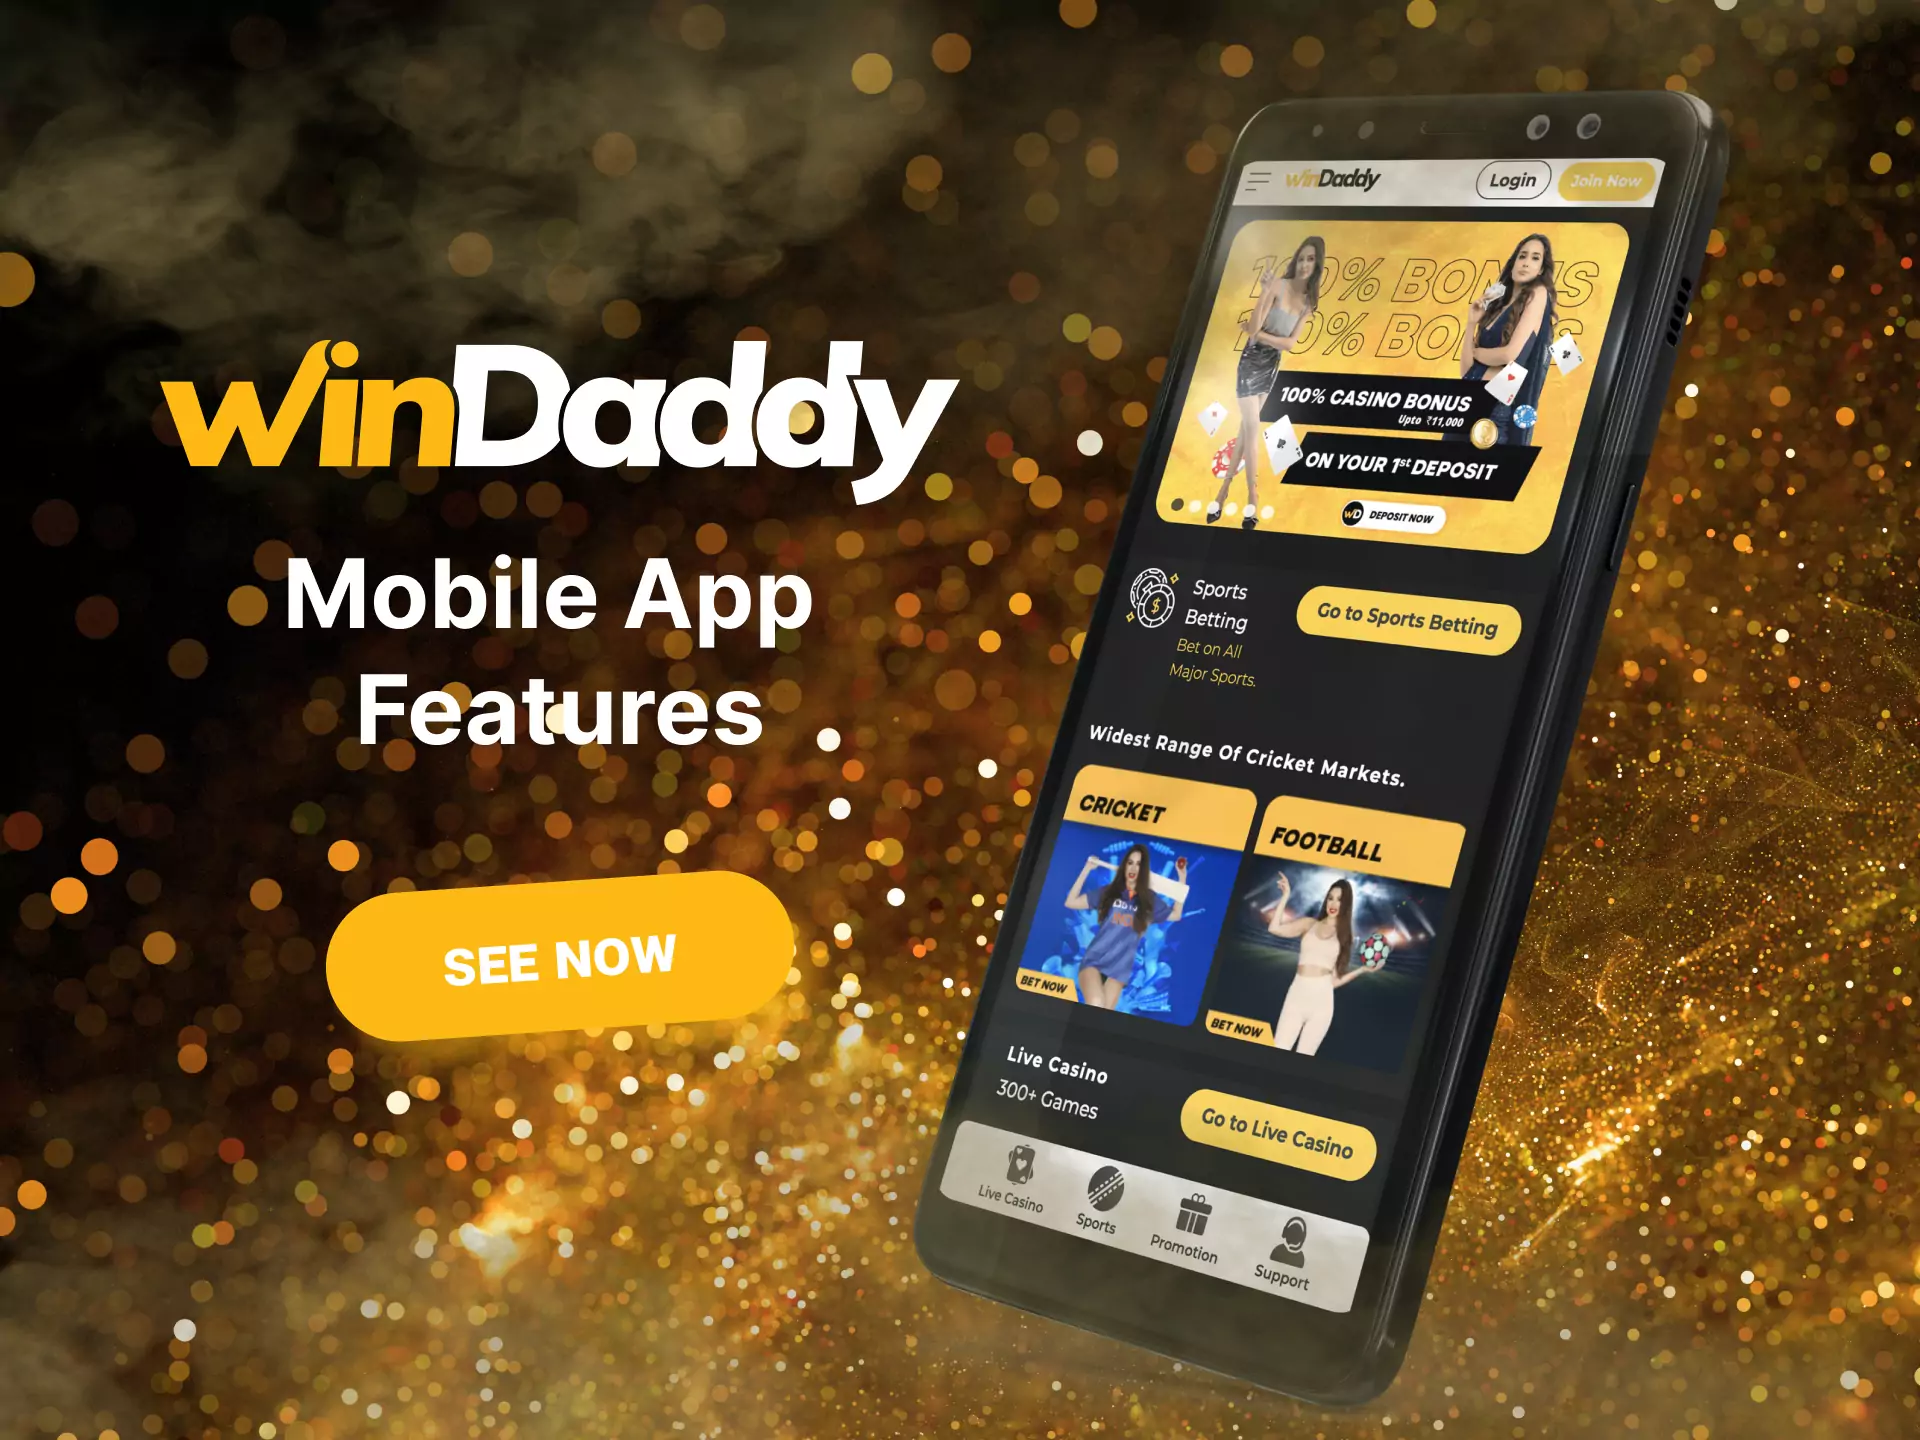 Windaddy is a reliable site that offers many games and benefits to the user.